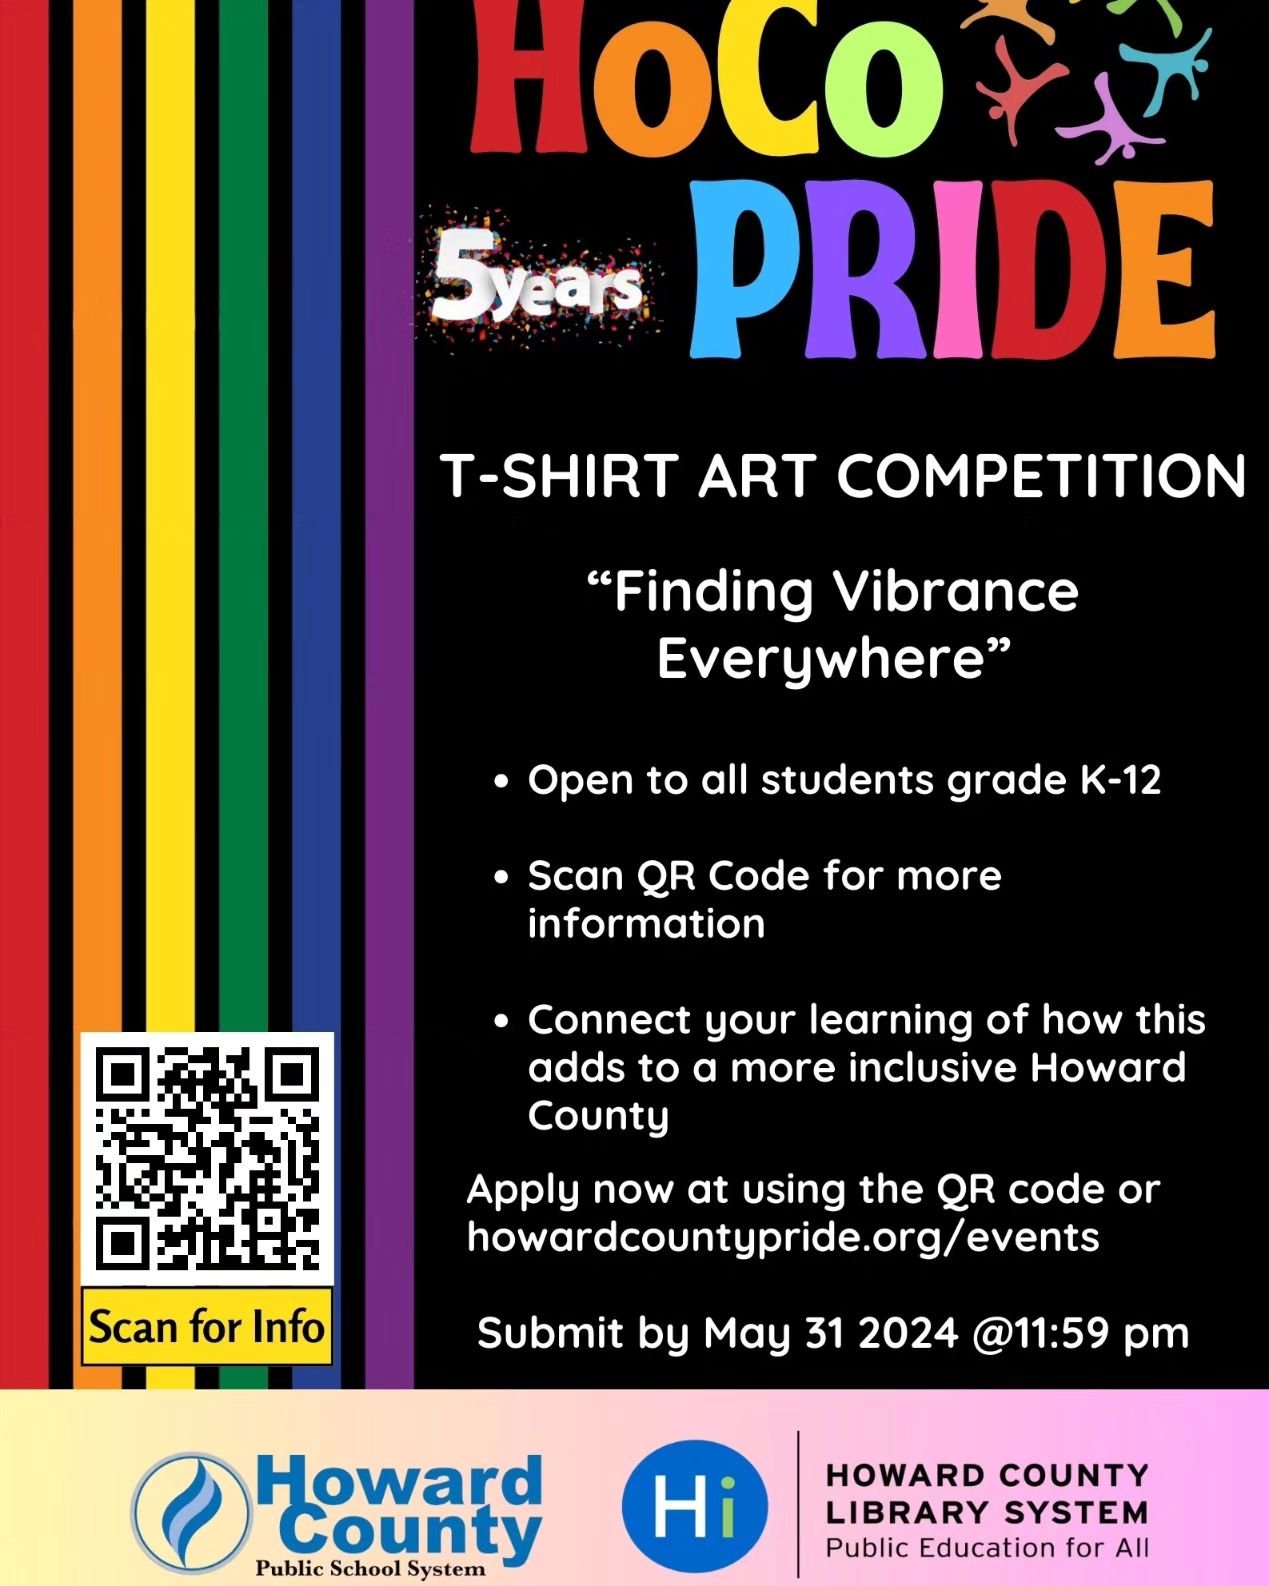 It's that time of year again! Join us for our second ever T-Shirt Art Competition!

For more info, head to howardcountypride.org/events

#art #youngartists #hocopride #howardcounty #howardcountypride #t-shirt #artcompetition #love #loveislove #fiveye